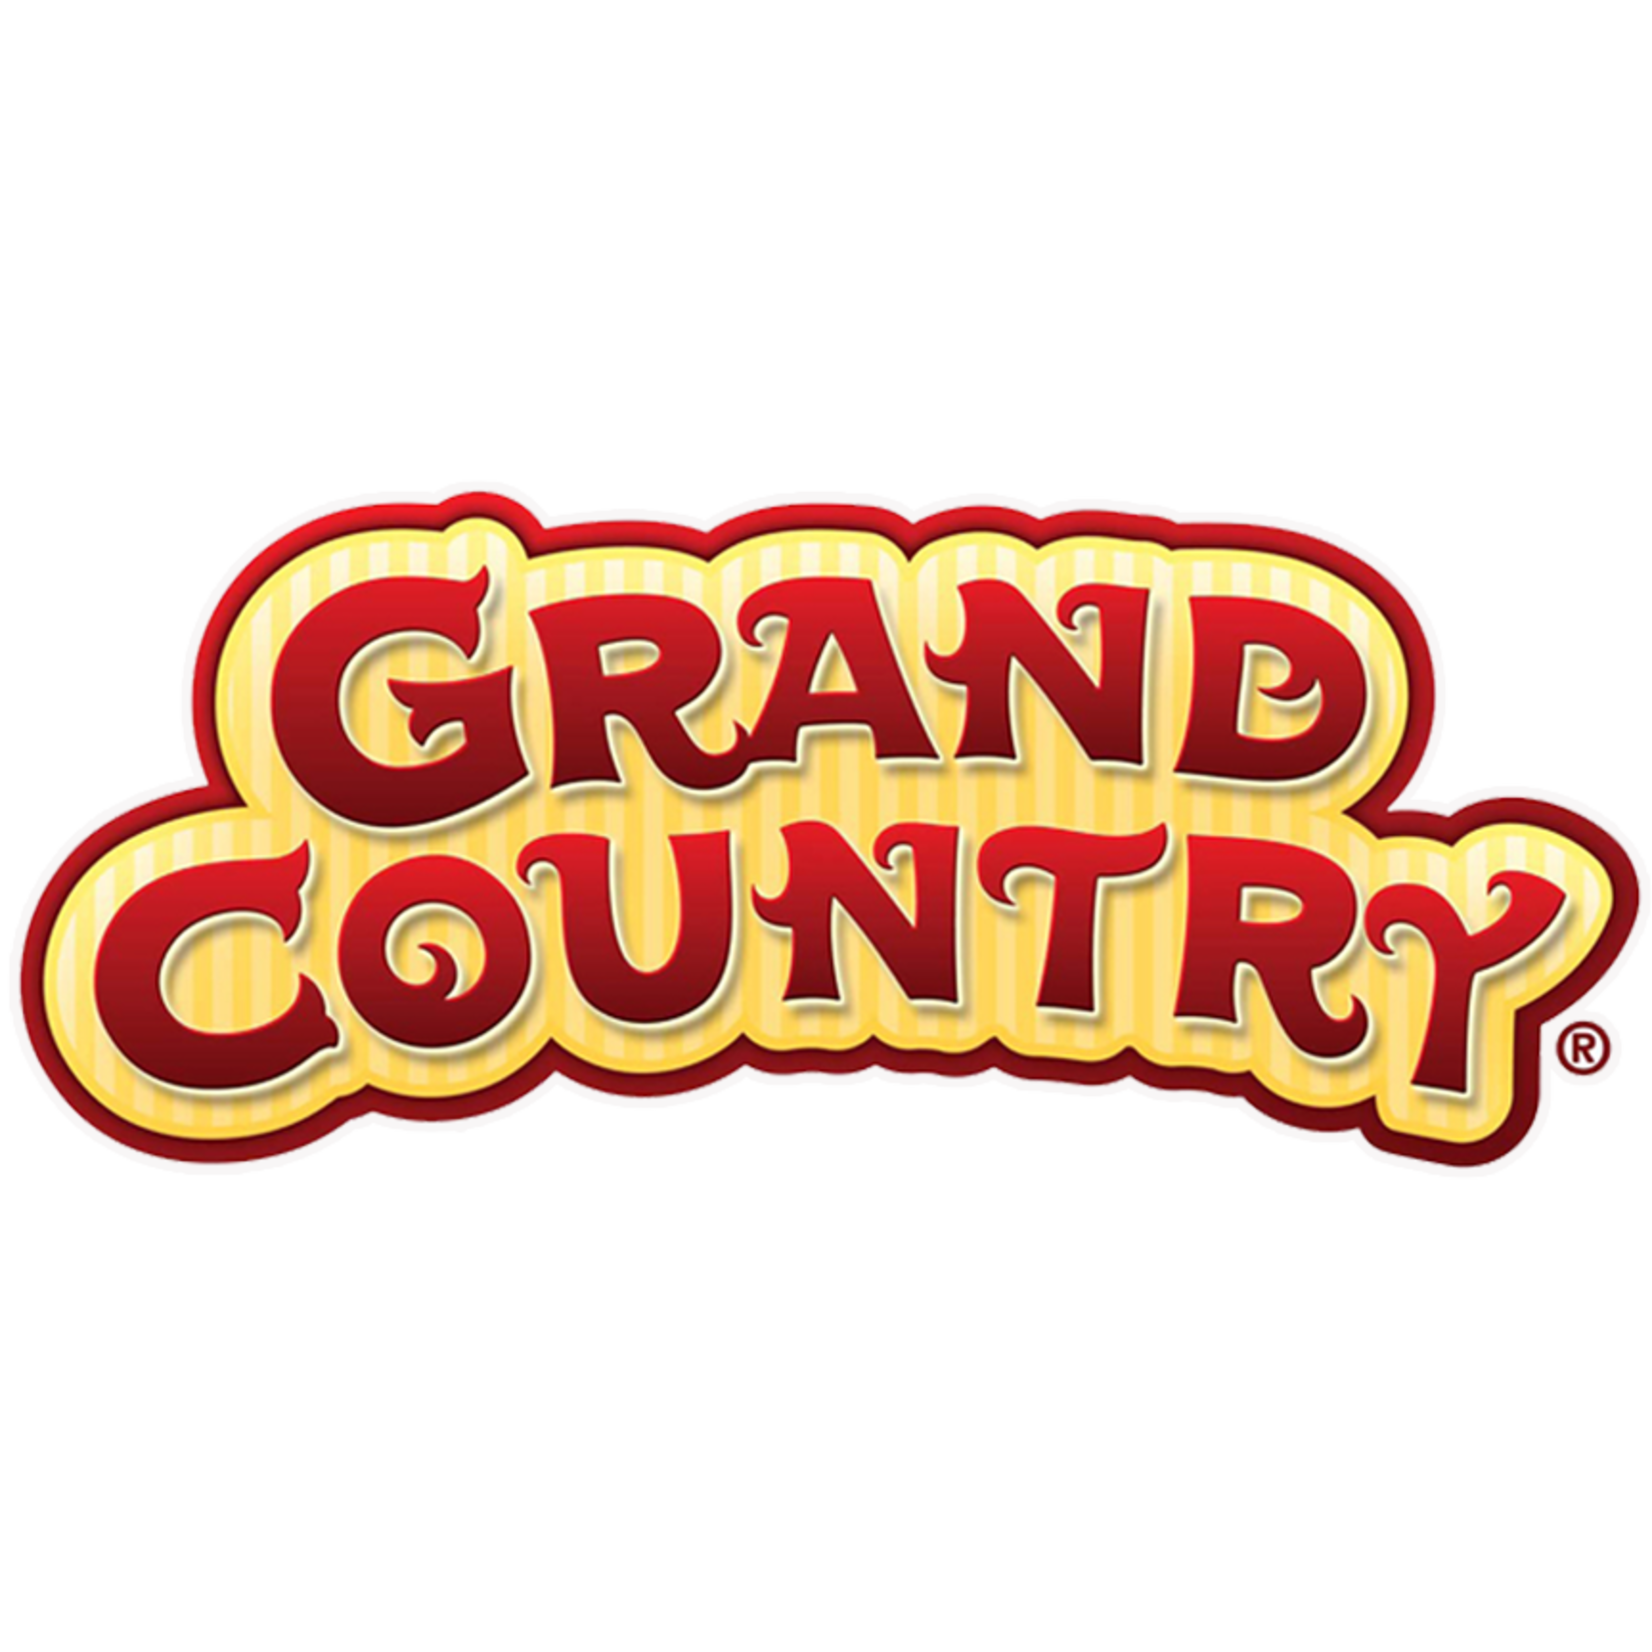 MO-Grand Country Music Hall-Branson MO-Grand Country Music Hall-Branson $87.28 Pair of admissions to "Down Home Country"